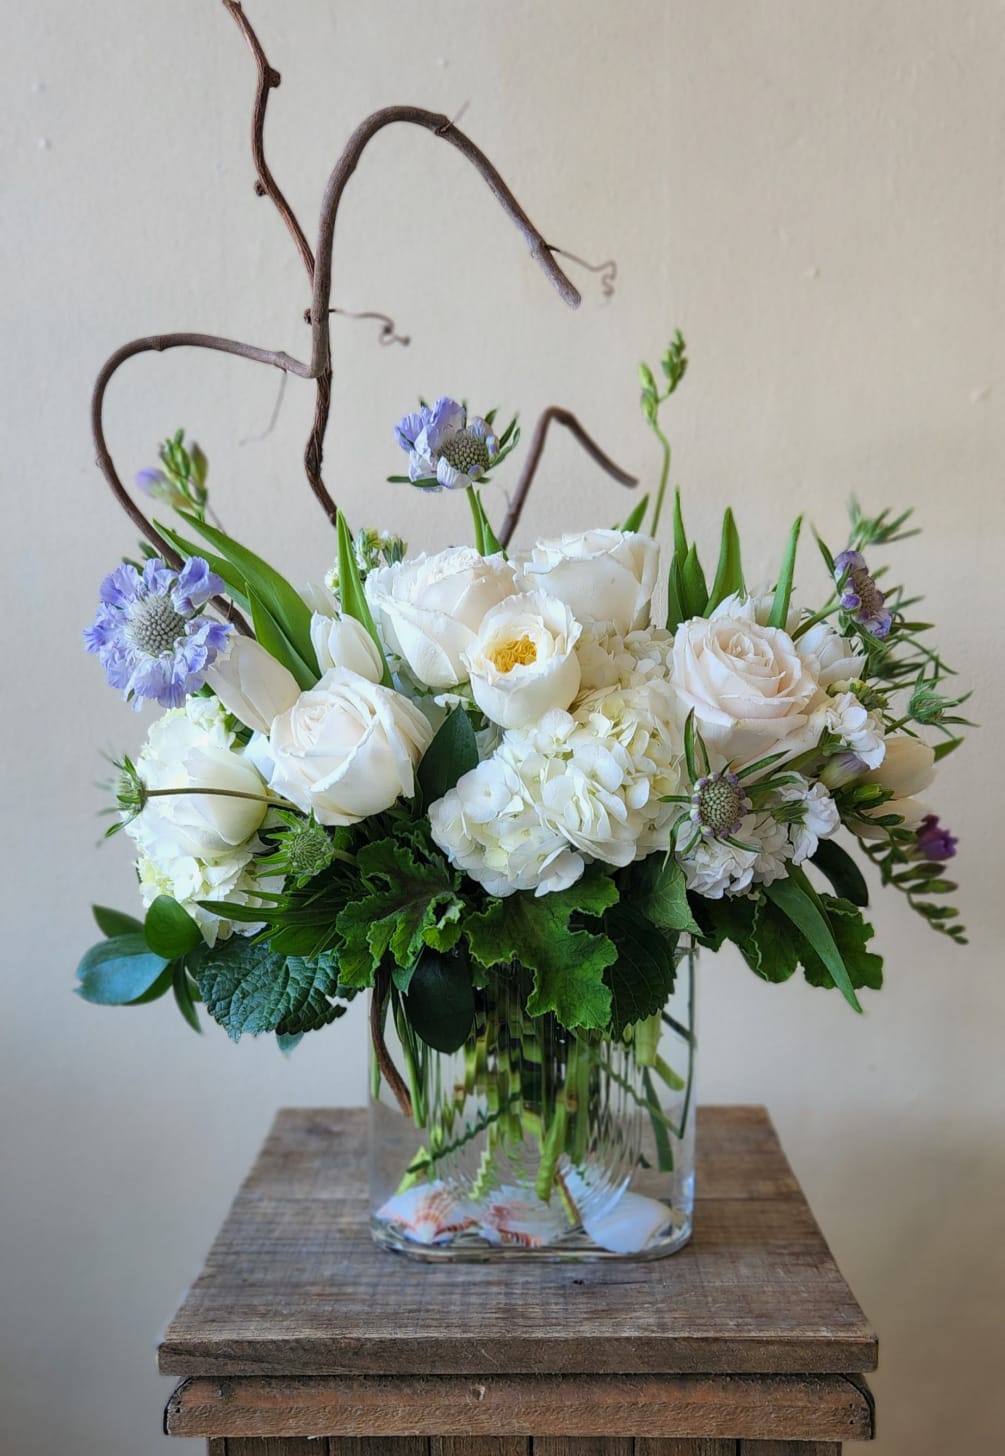 A coastal inspired arrangement of roses, hydrangea, and lisianthus with branch and